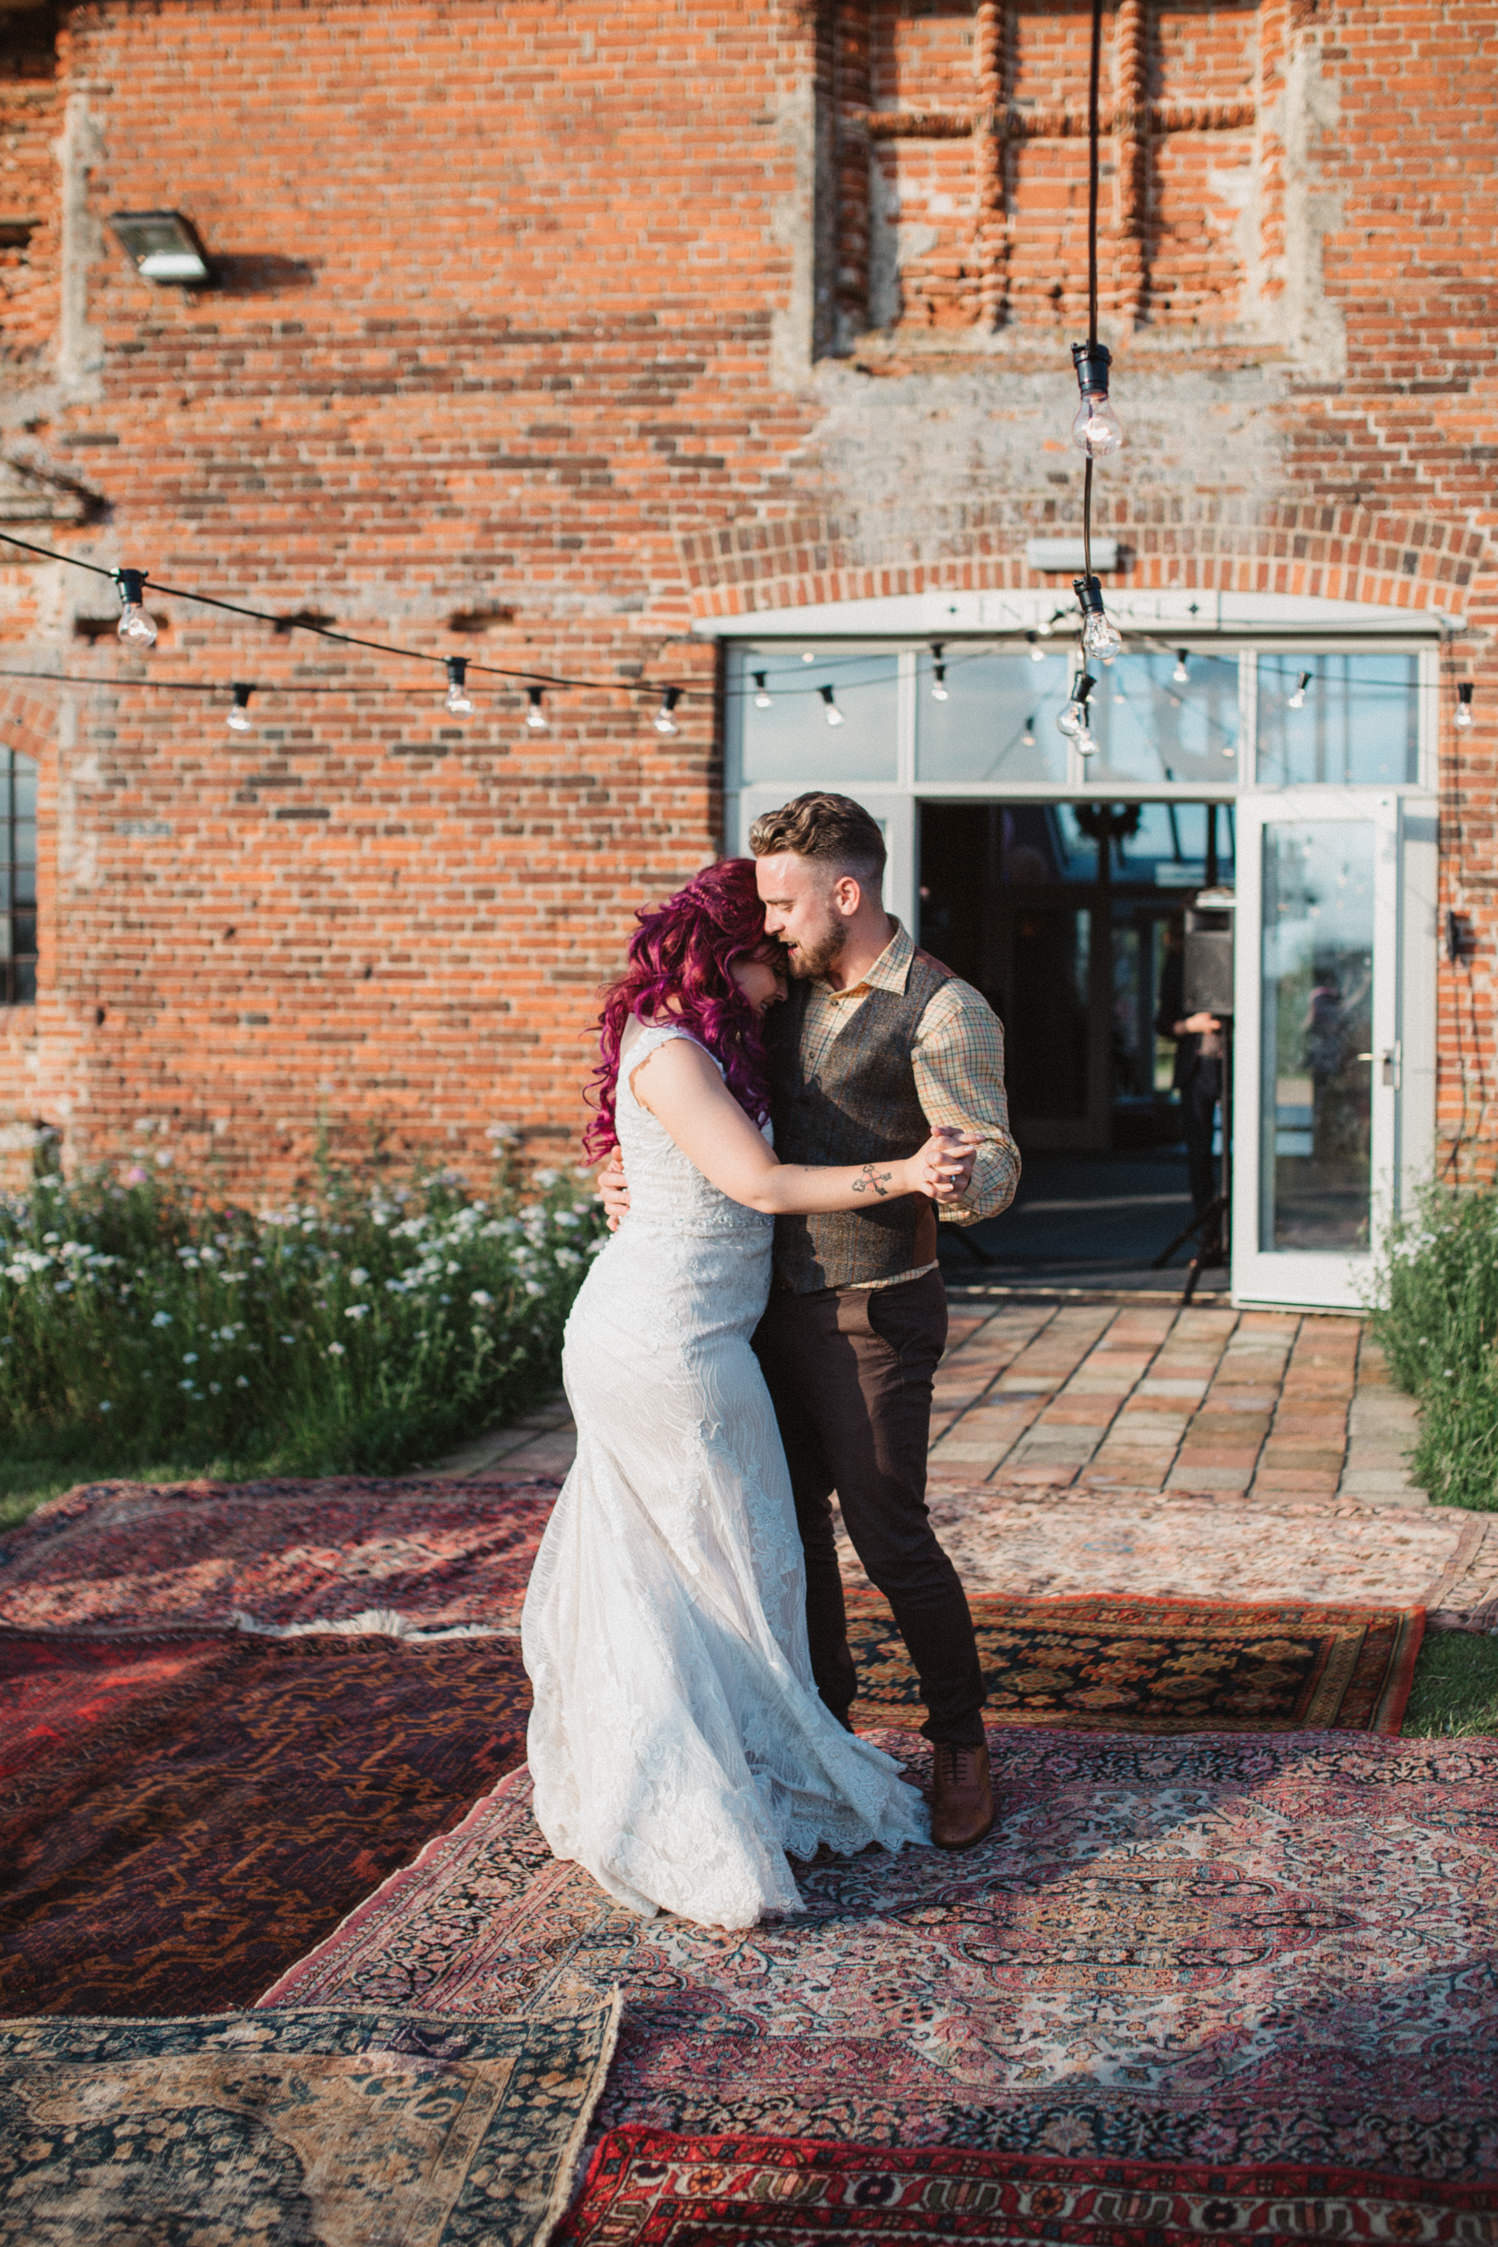 relaxed wedding photography at godwick great barn norfolk